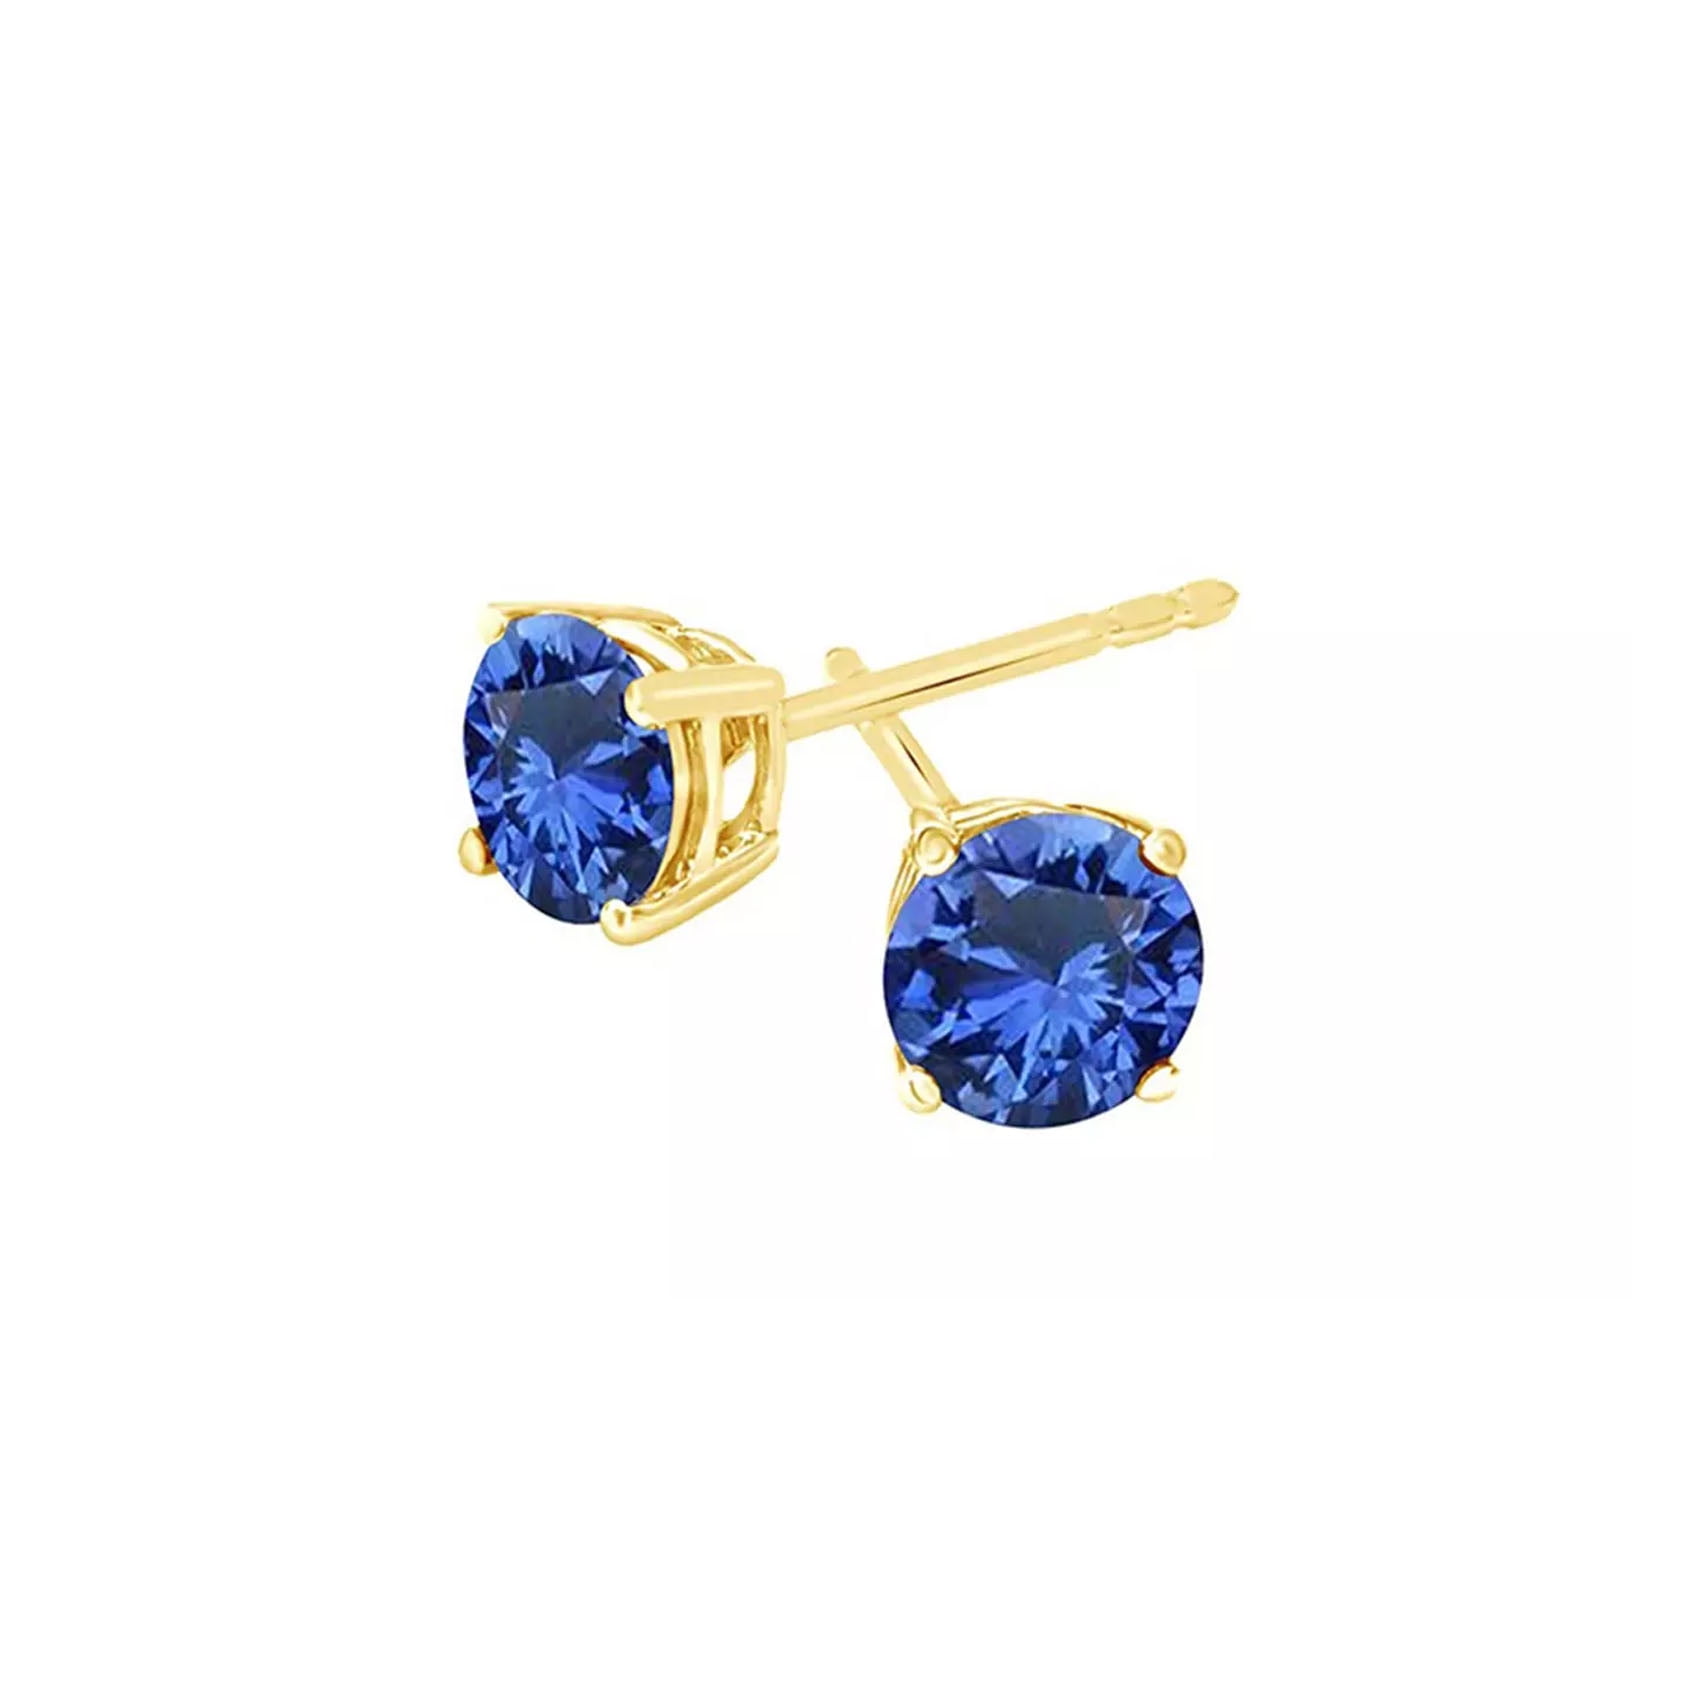 10k Yellow Gold Plated 4 Ct Round Created Blue Sapphire Stud Earrings